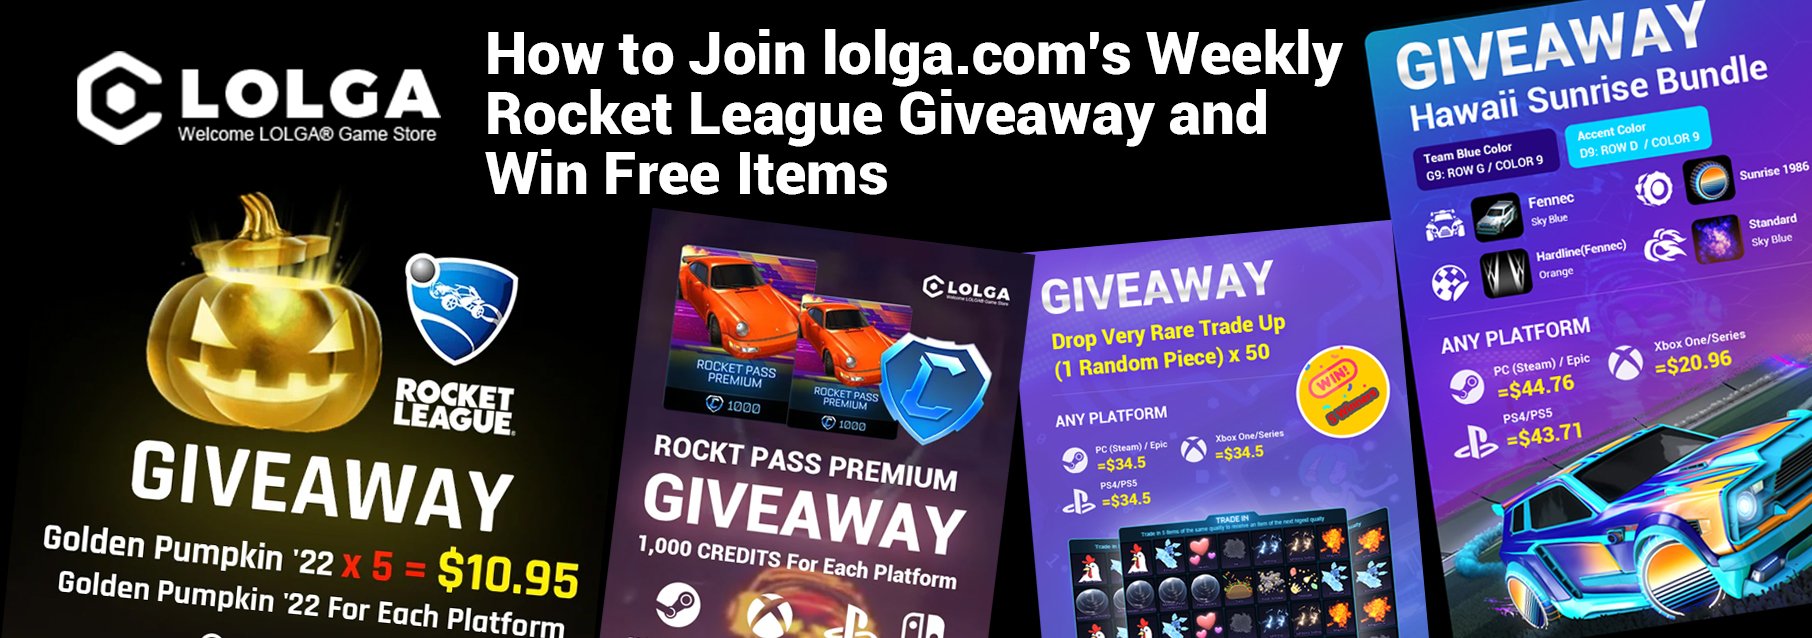  How to Join lolga.com's Weekly Rocket League Giveaway and Win Free Items 